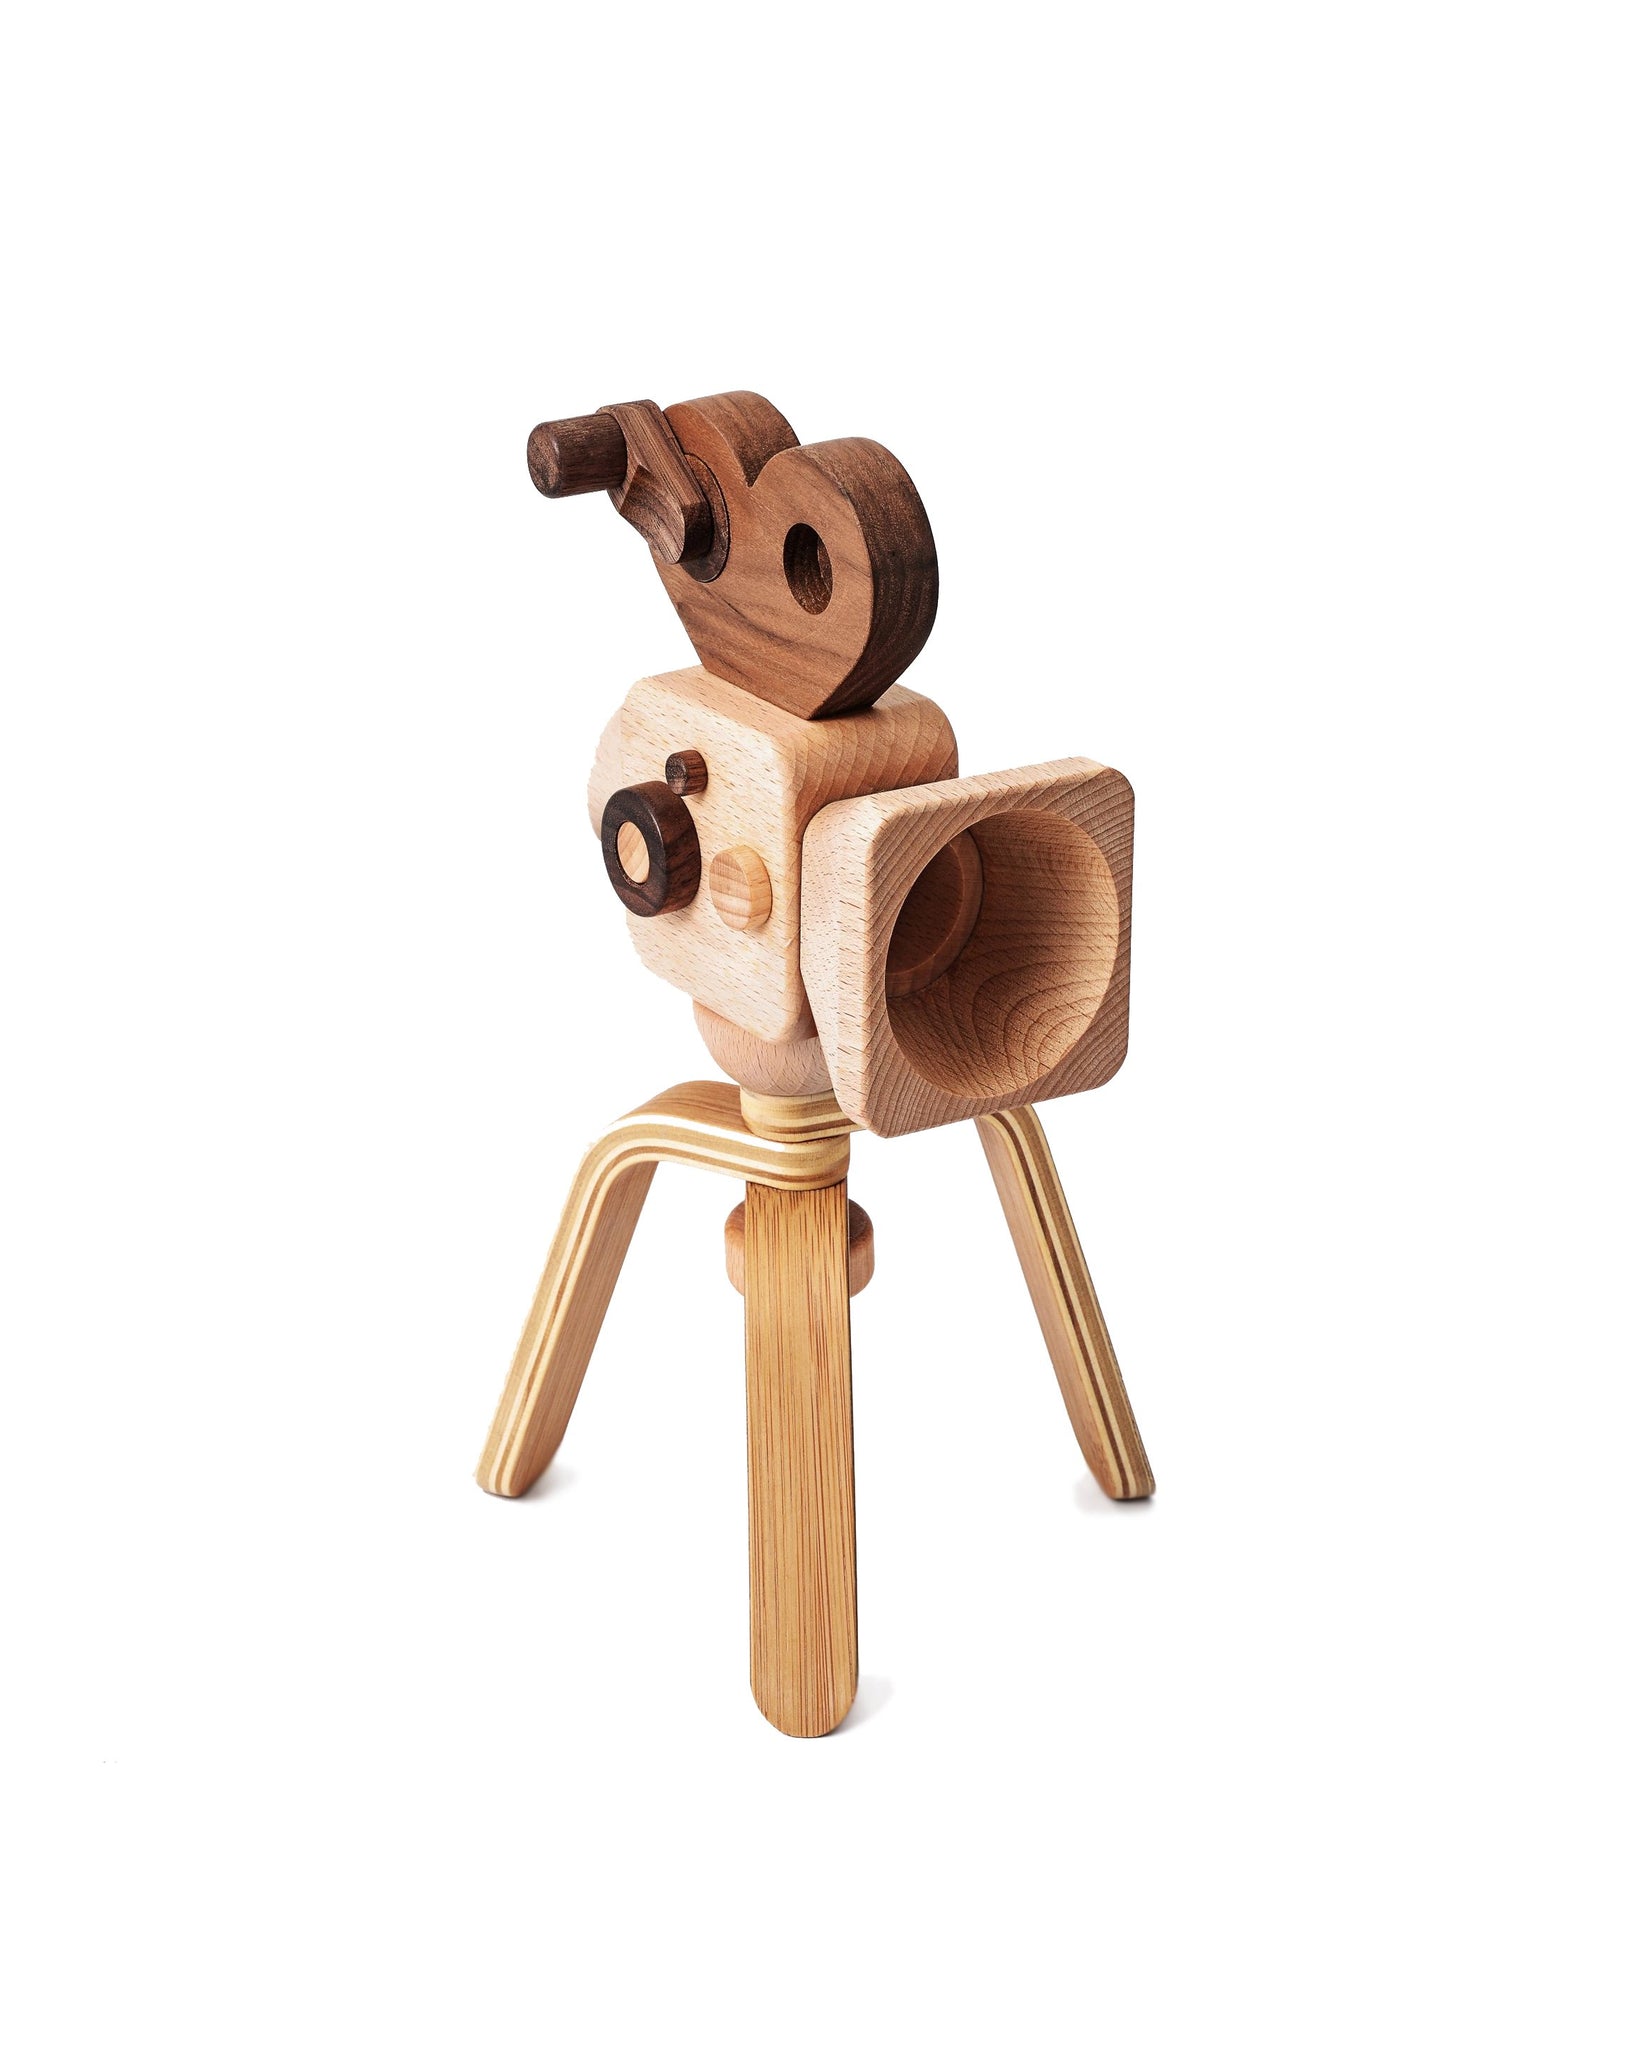 Kids' Super 16 Pro Wooden Toy Camera with Tripod by Father's Factory